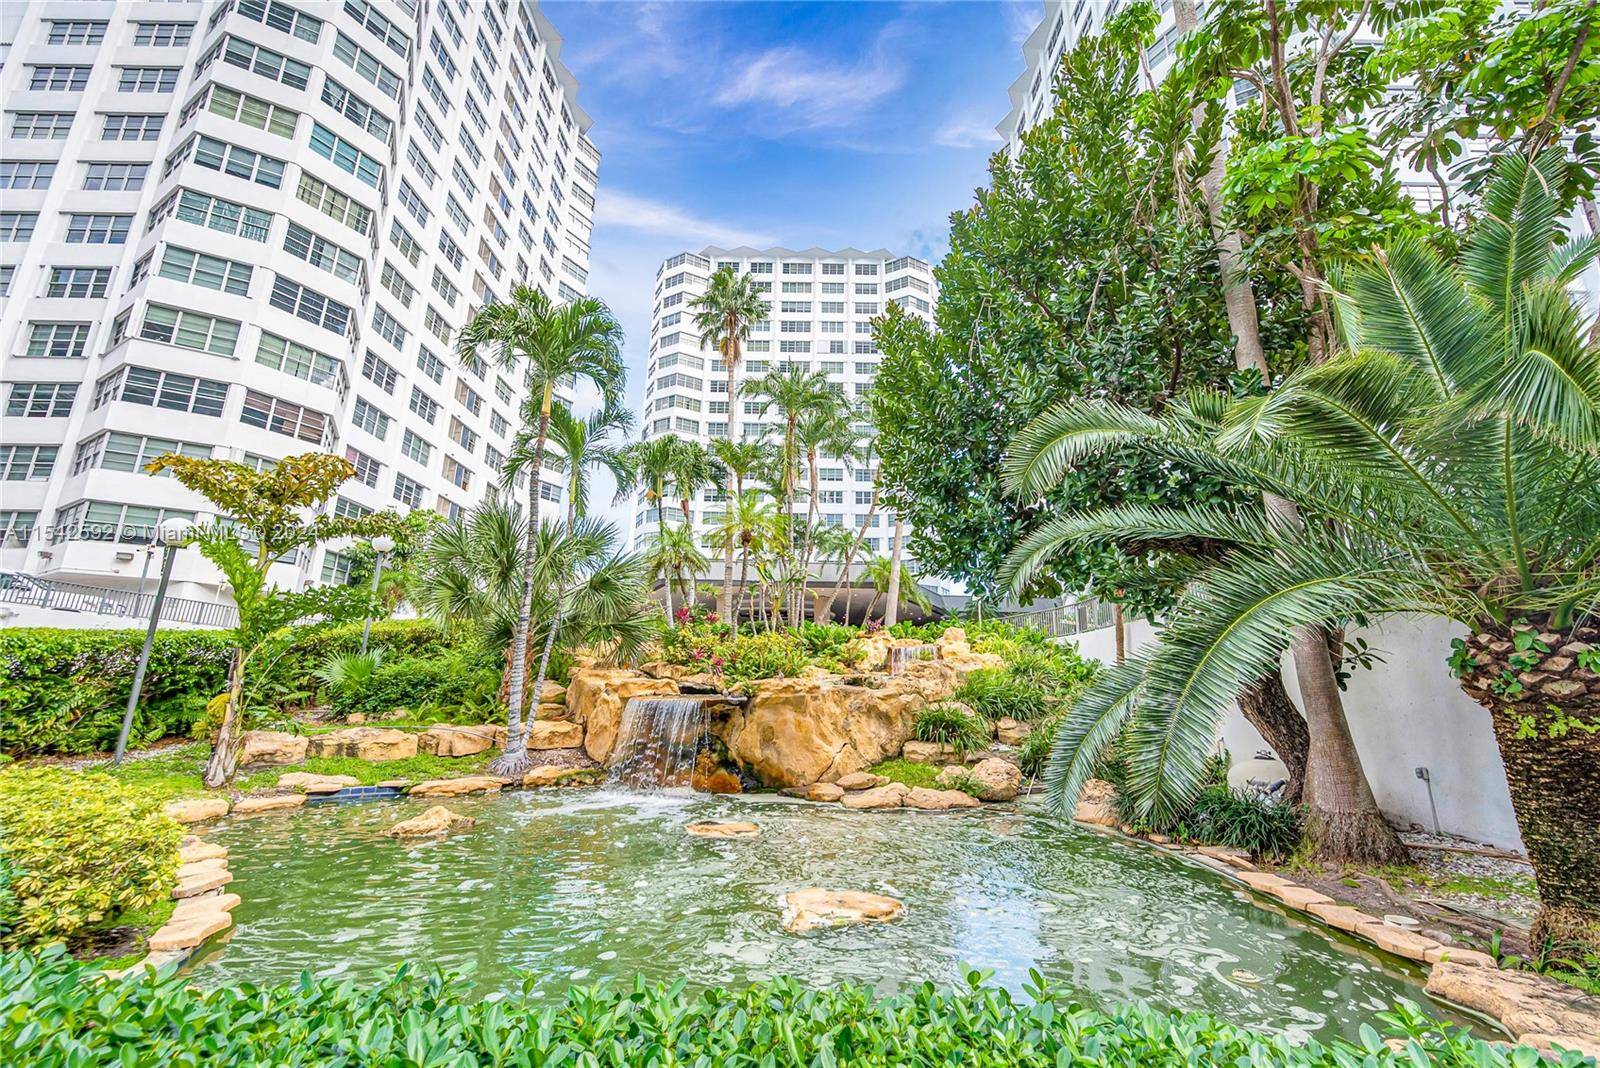 Experience Brickell city living at its finest in this beautiful furnished pristine 2 bedroom, 2 bathroom unit is spacious and filled with natural light.